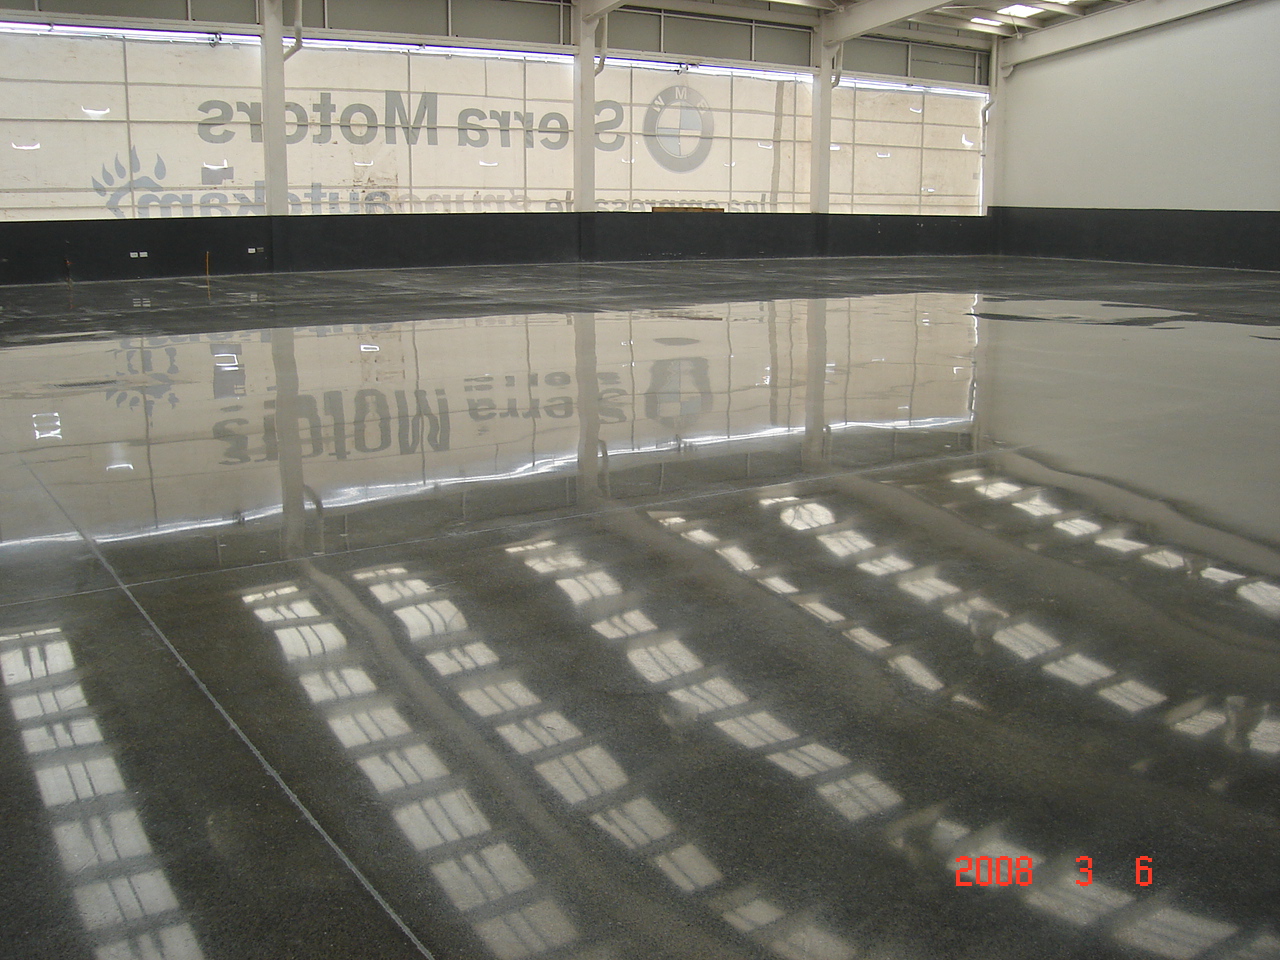 The shiny surface of a polished cement floor reflects the ceiling of a BMW facility in Monterrey, MX.